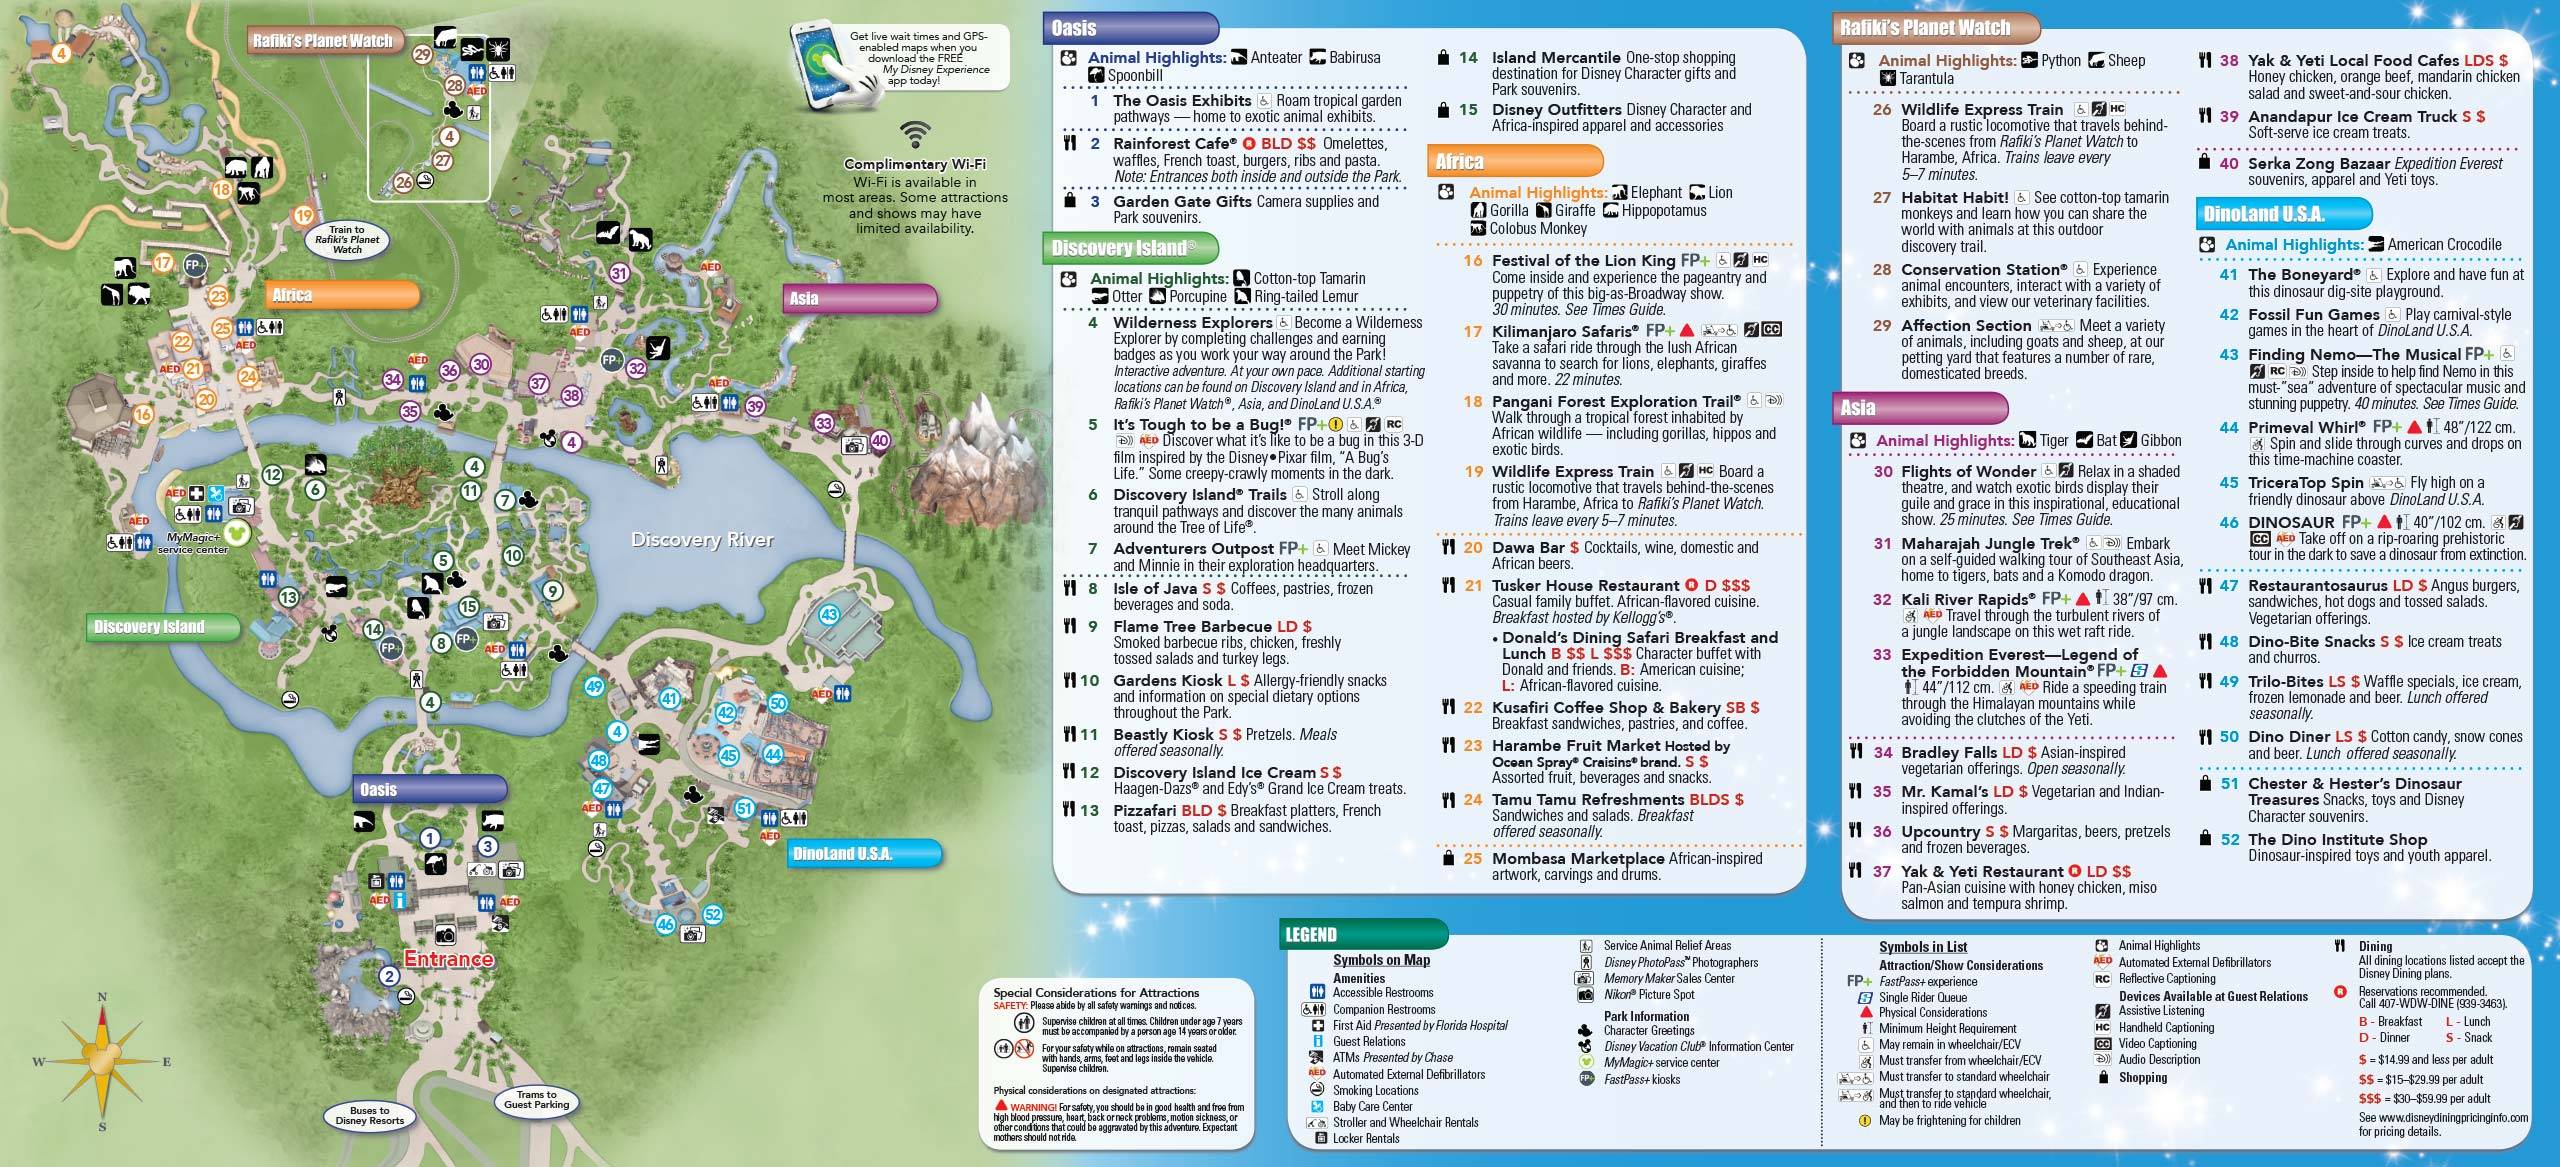 New Disney's Animal Kingdom Park Guide Map with Harambe Theater District addition